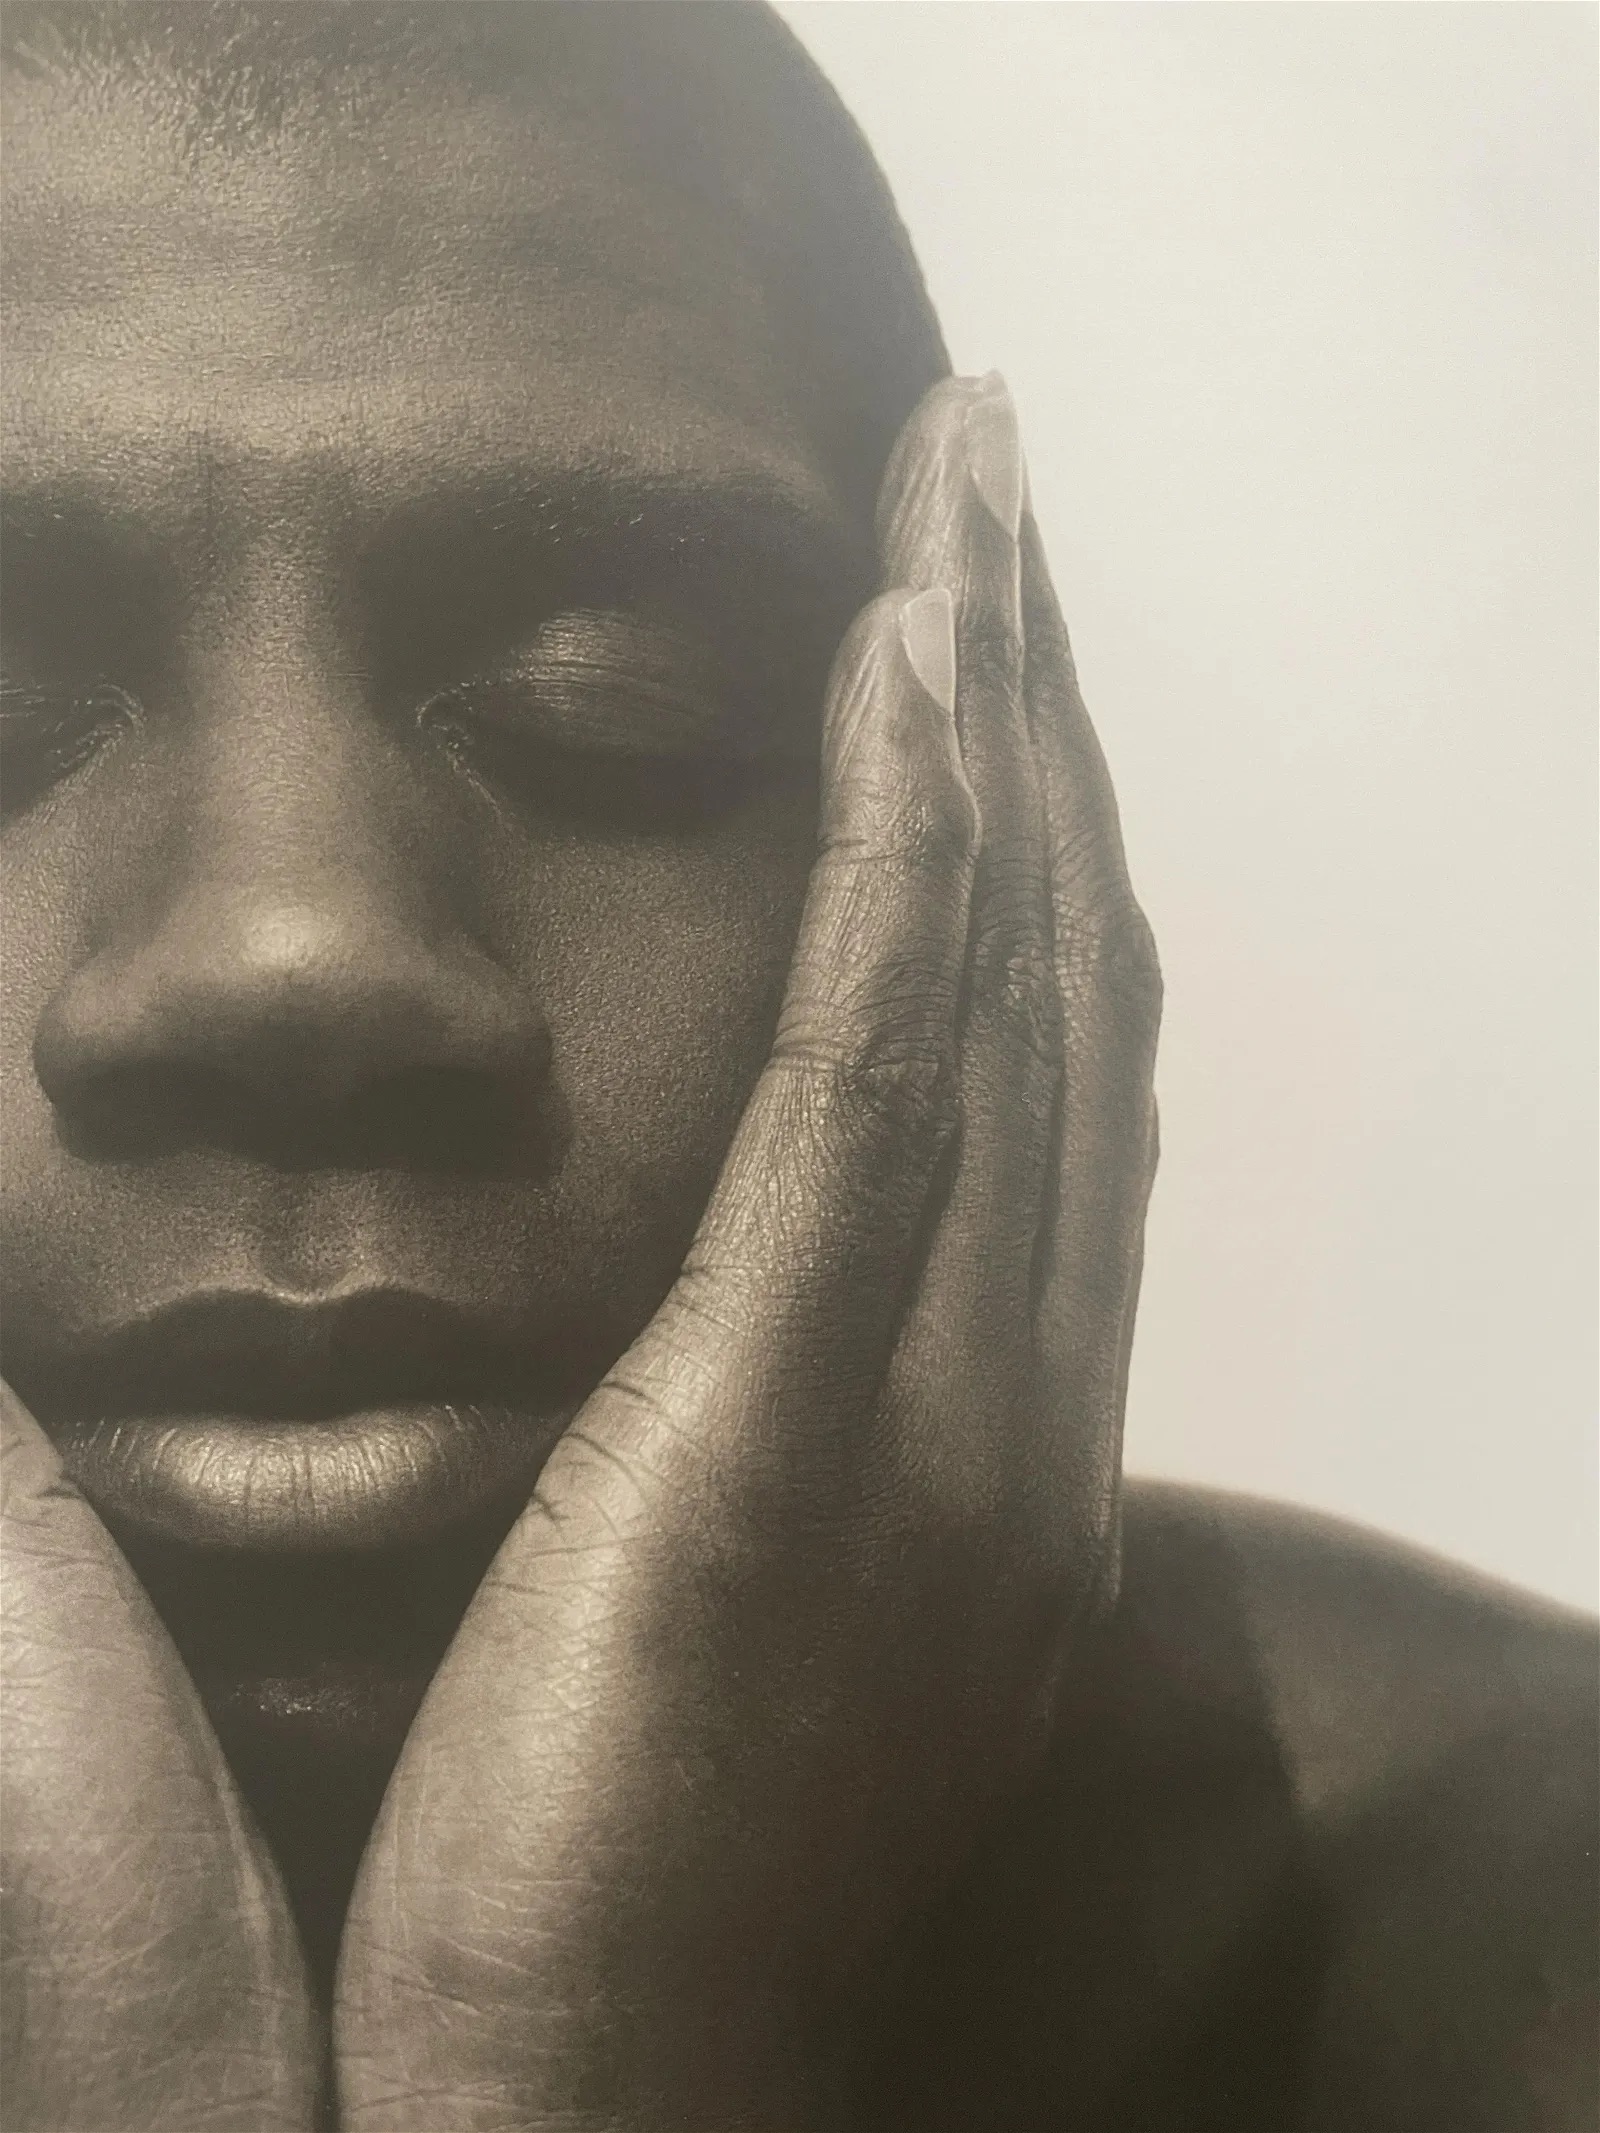 Herb Ritts "Earvin Magic Johnson, Hollywood, 1992" Print - Image 5 of 5